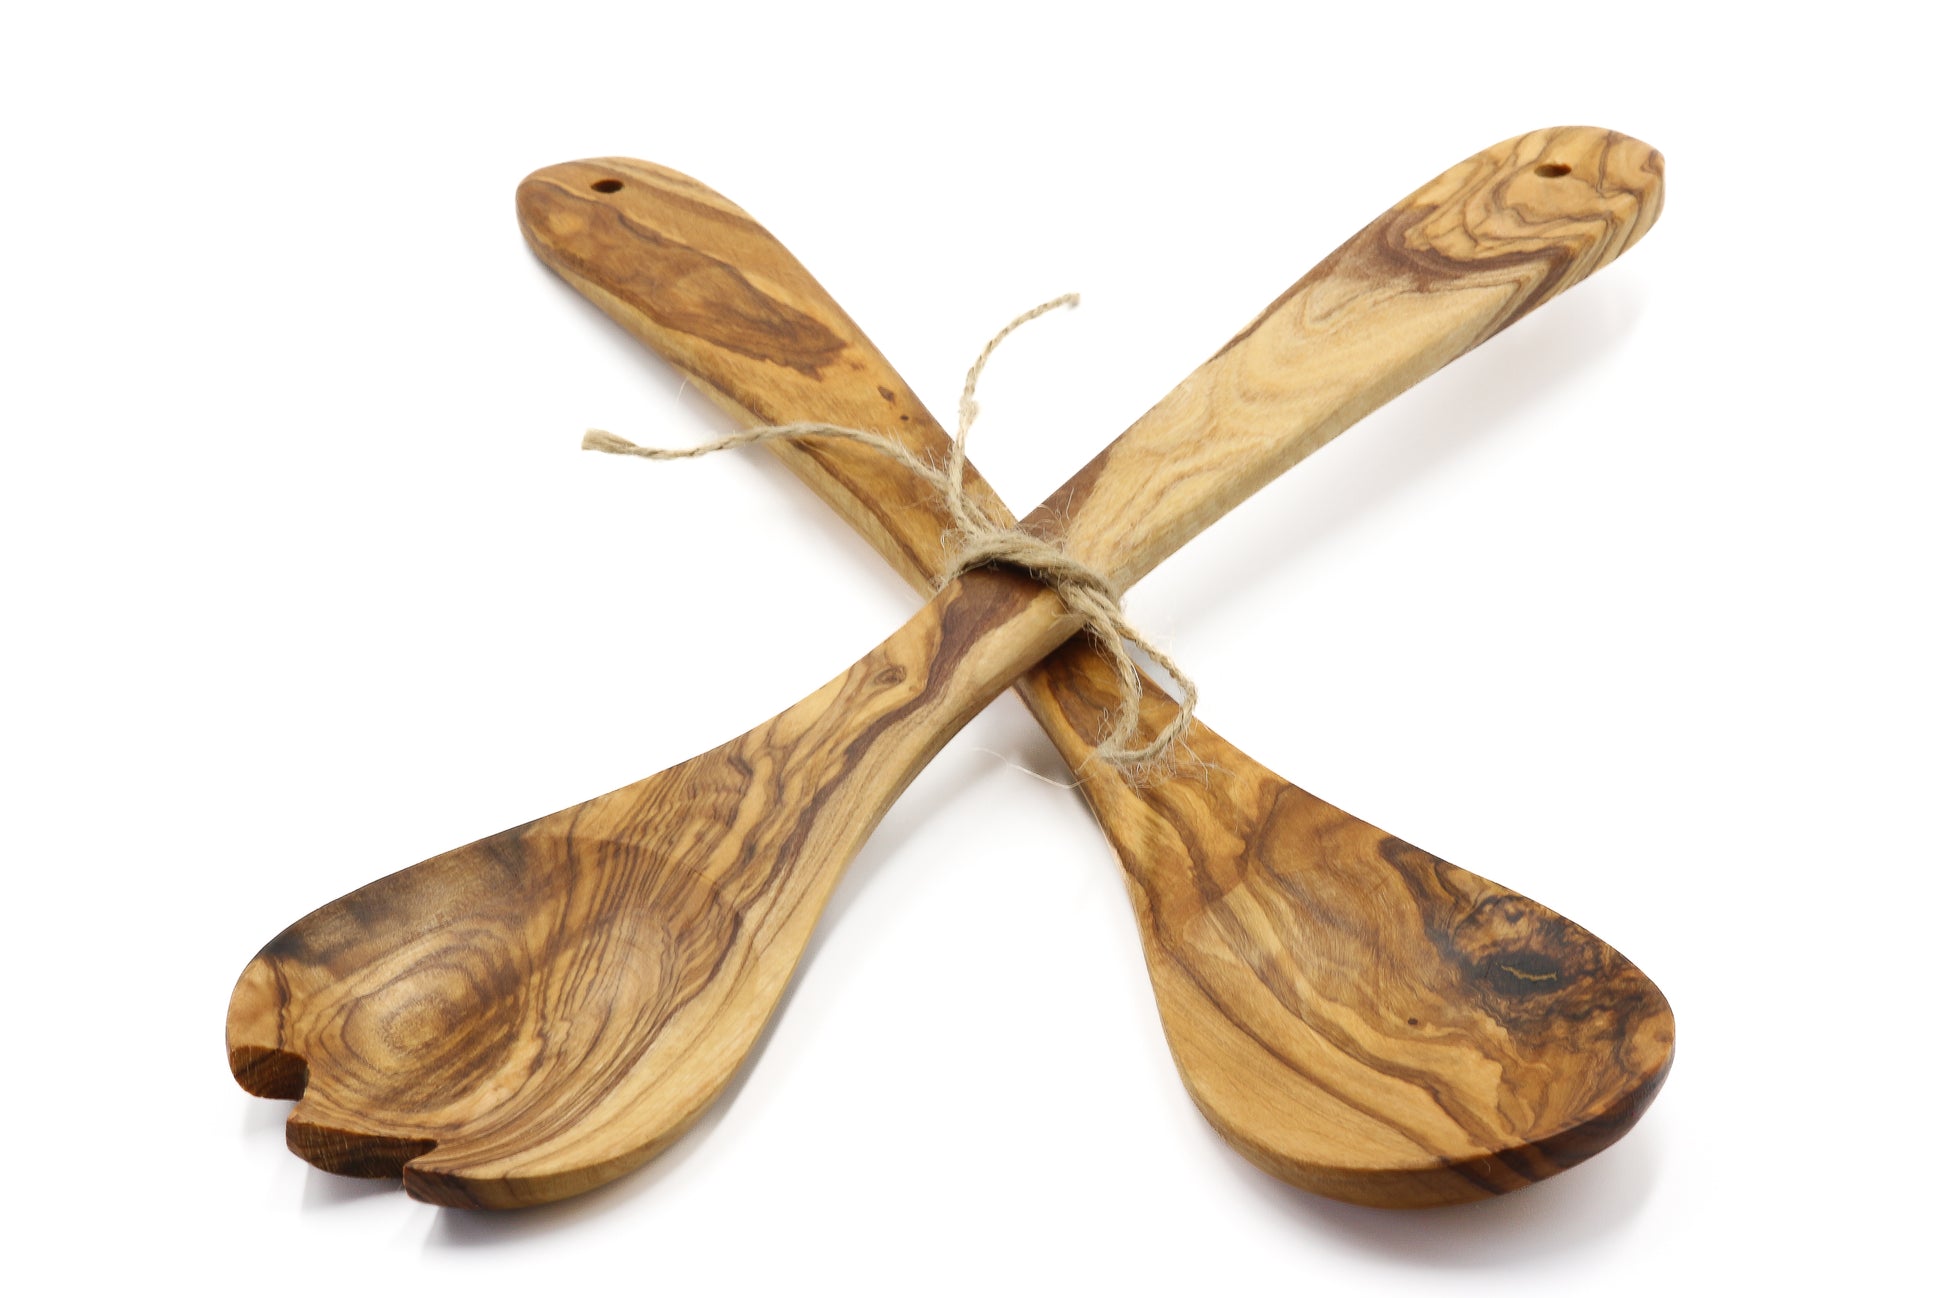 Olive wood salad servers in a set of two for your fresh salads